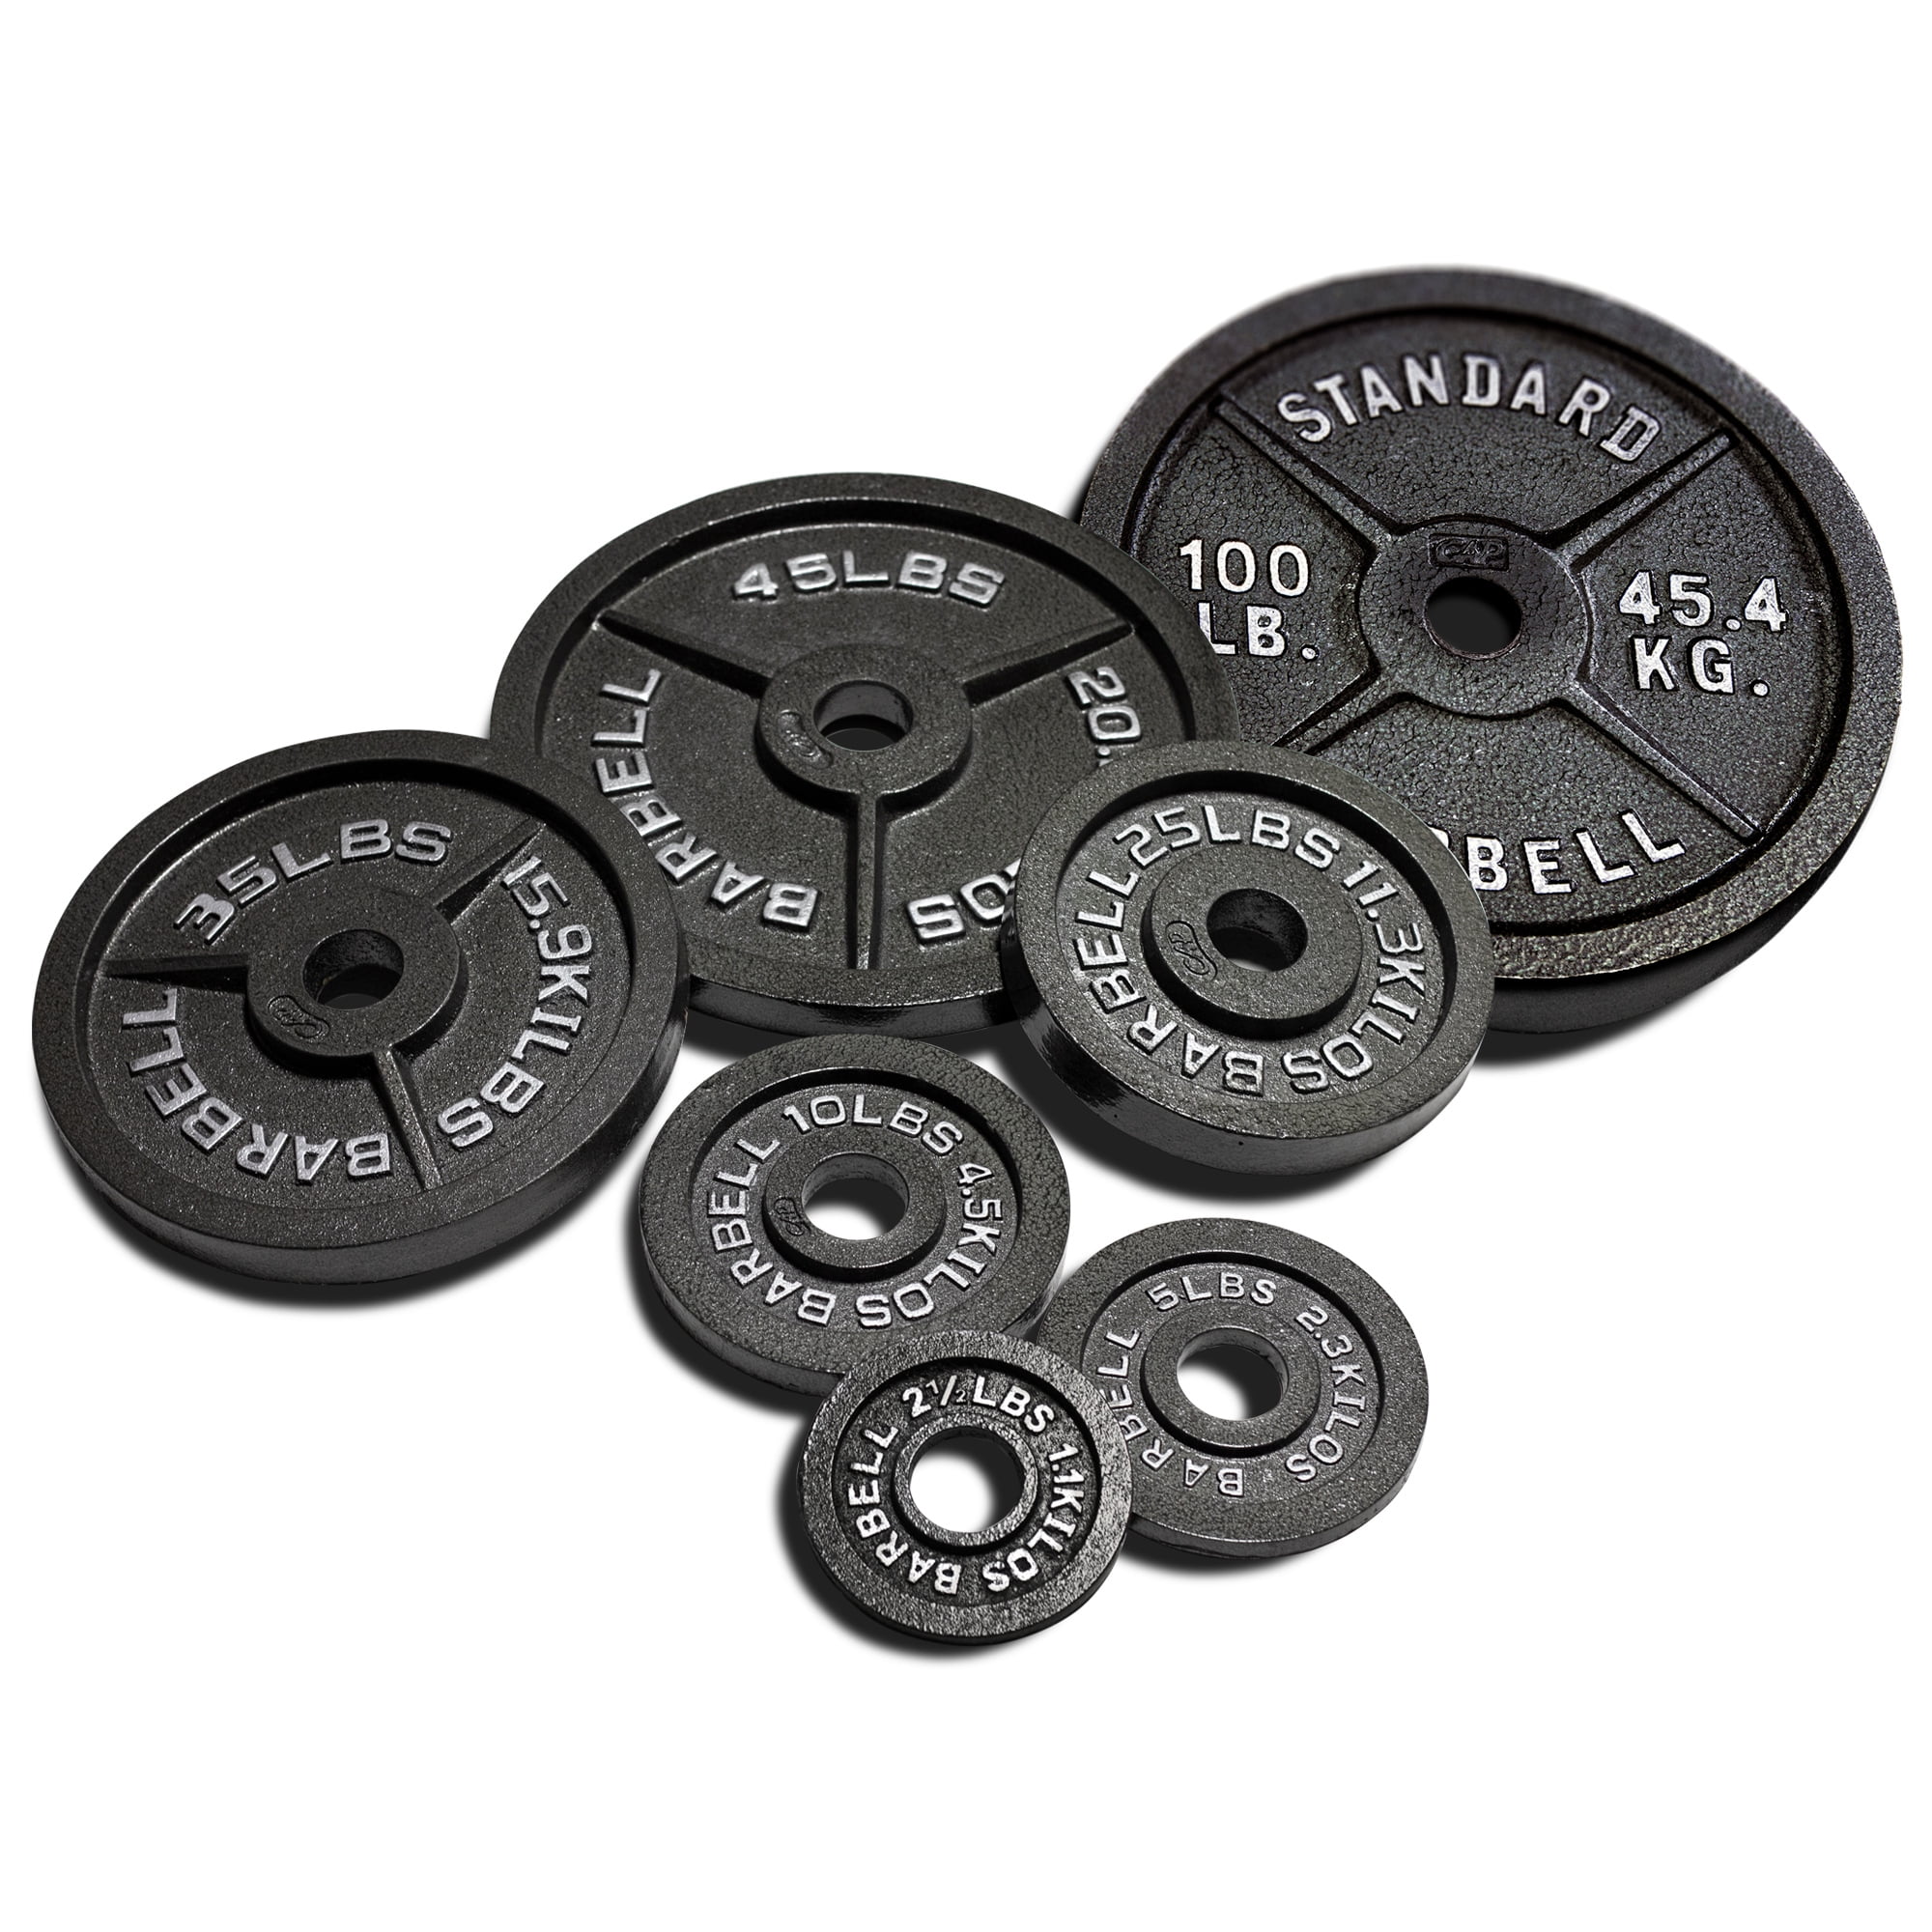 CAP Standard 1" Dumbbell Handles & 2.5 lb Weight Plates Choose Type &/or Size 